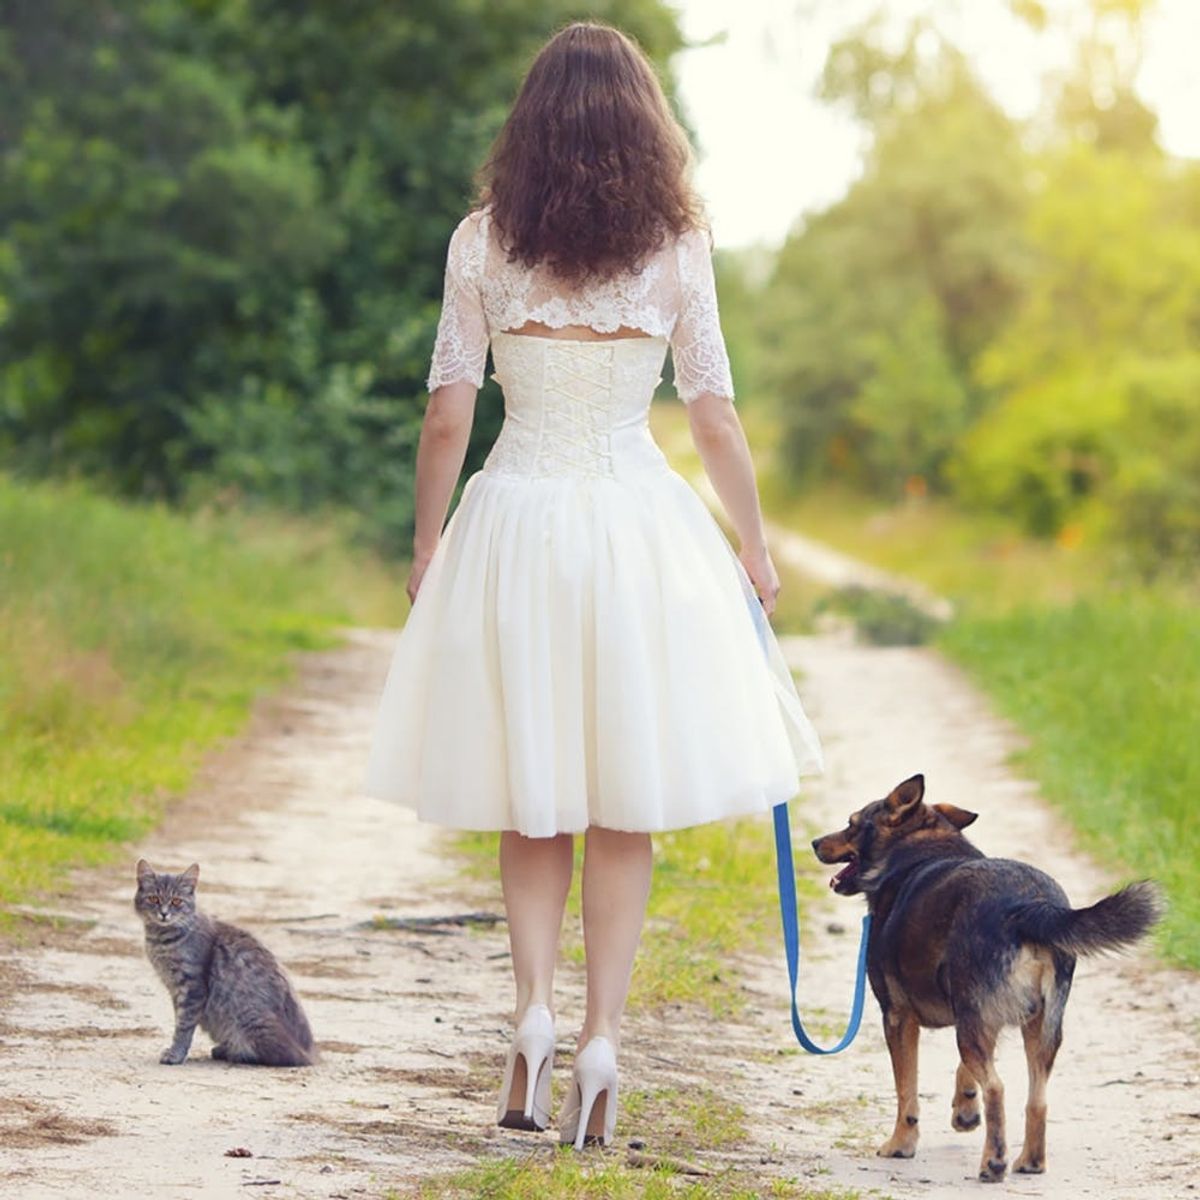 This Couple Traveled 3,000 Miles to Get Married at a Cat Sanctuary